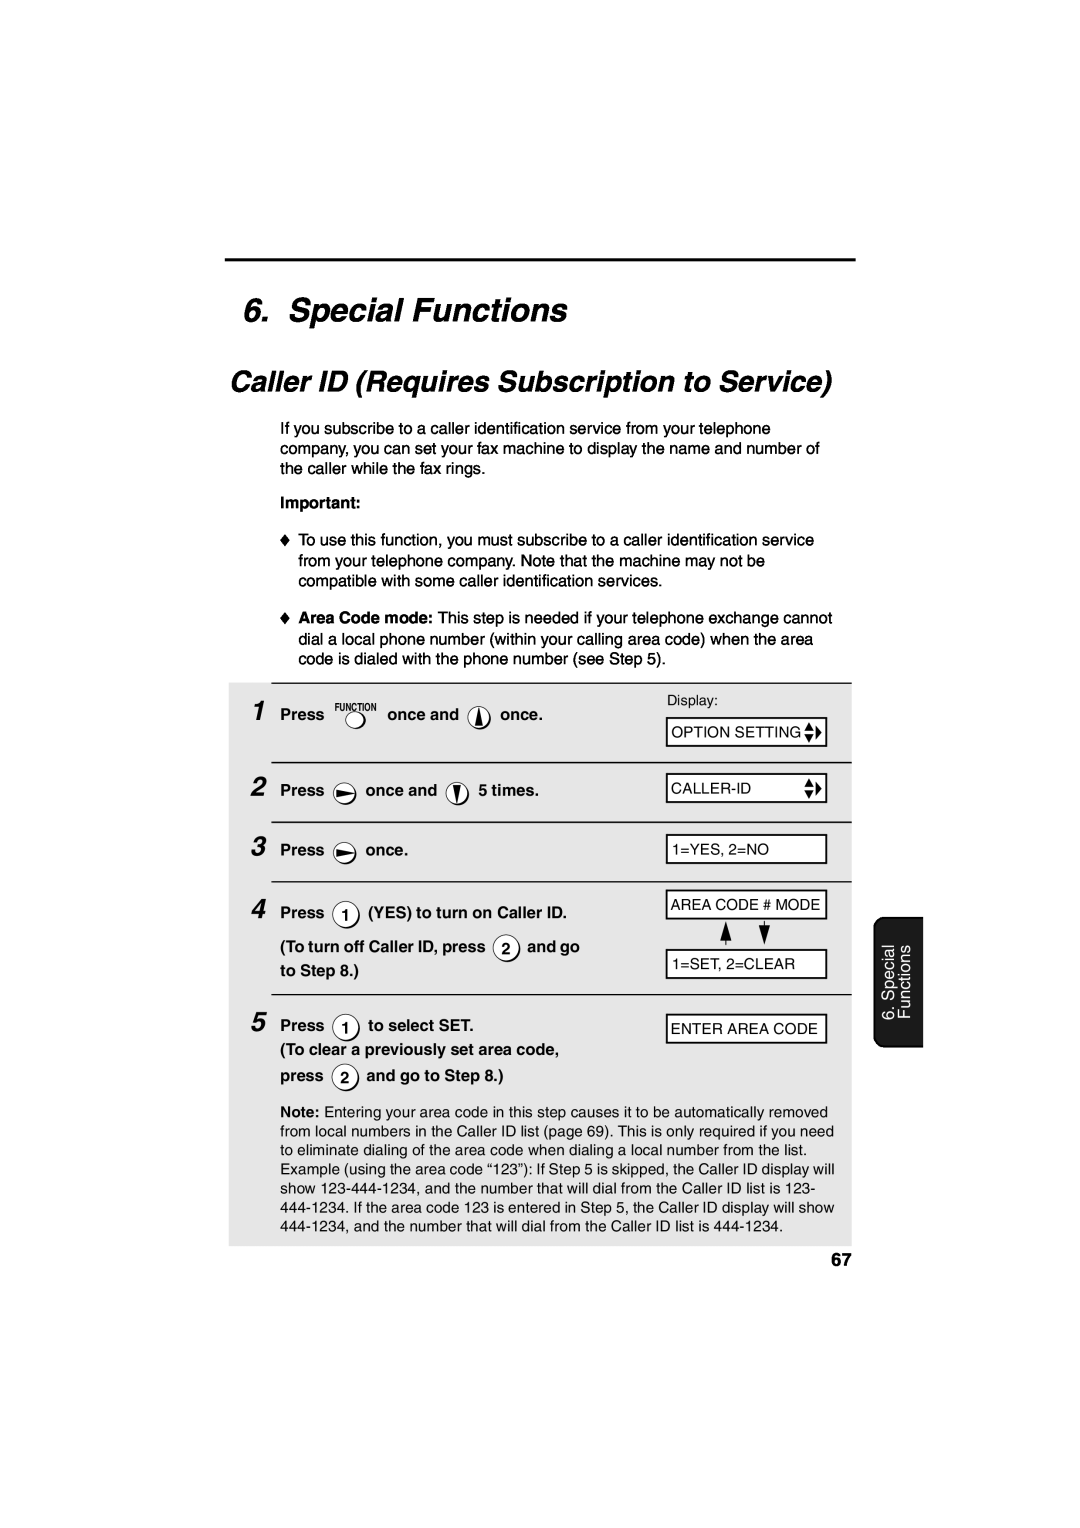 Sharp UX-A260 manual Special Functions, Caller ID Requires Subscription to Service 